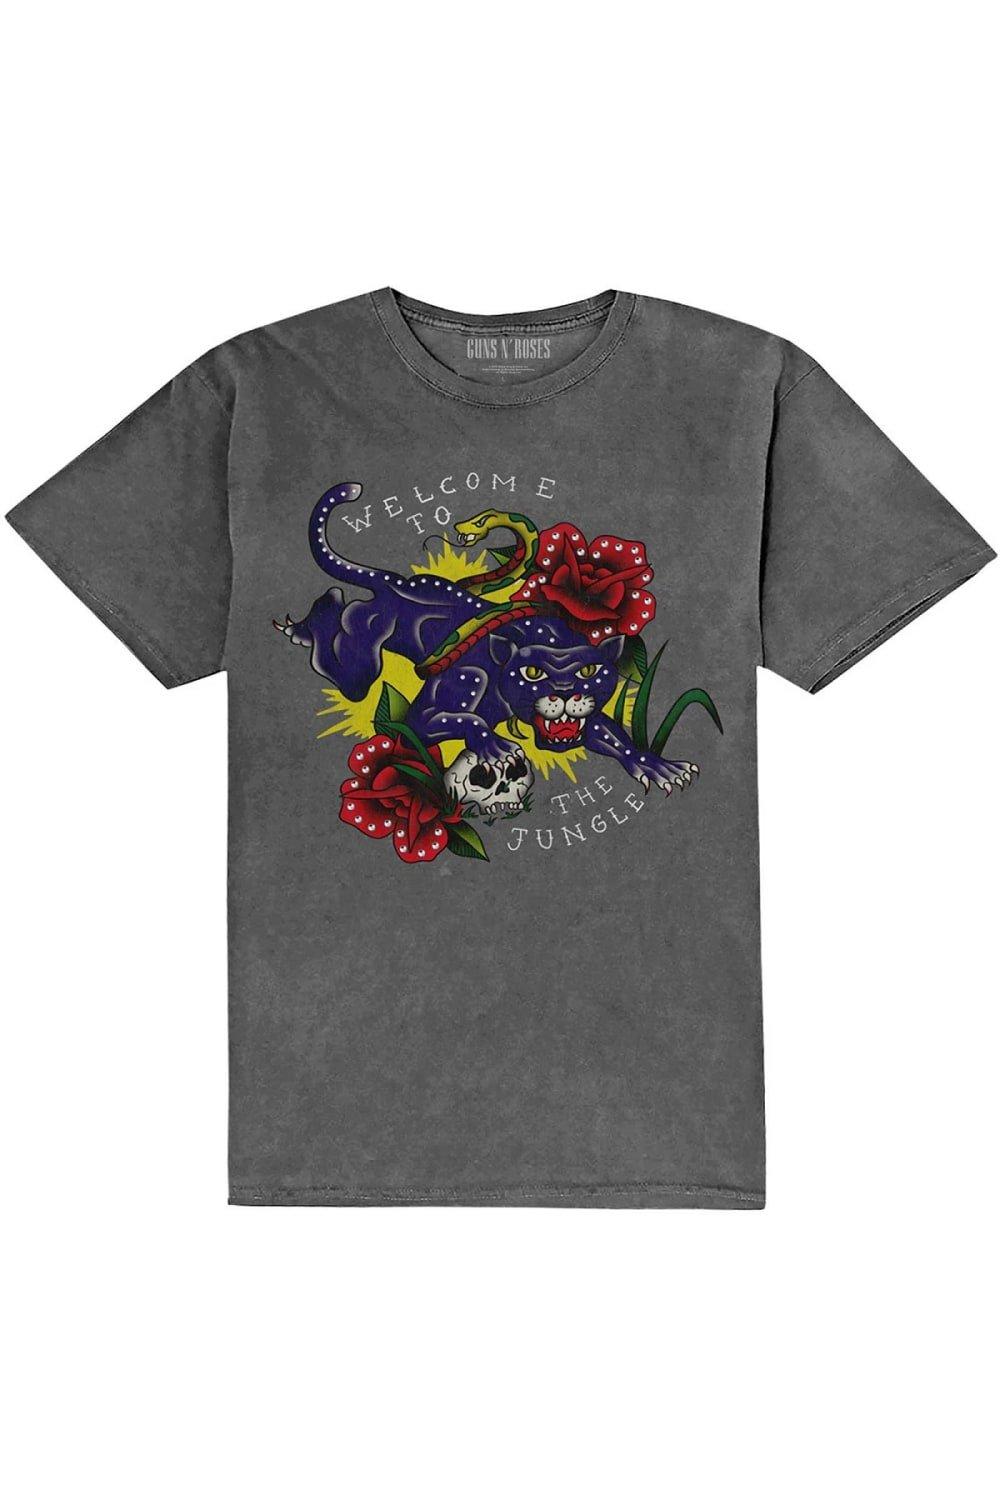 Welcome To The Jungle Embellished T-Shirt